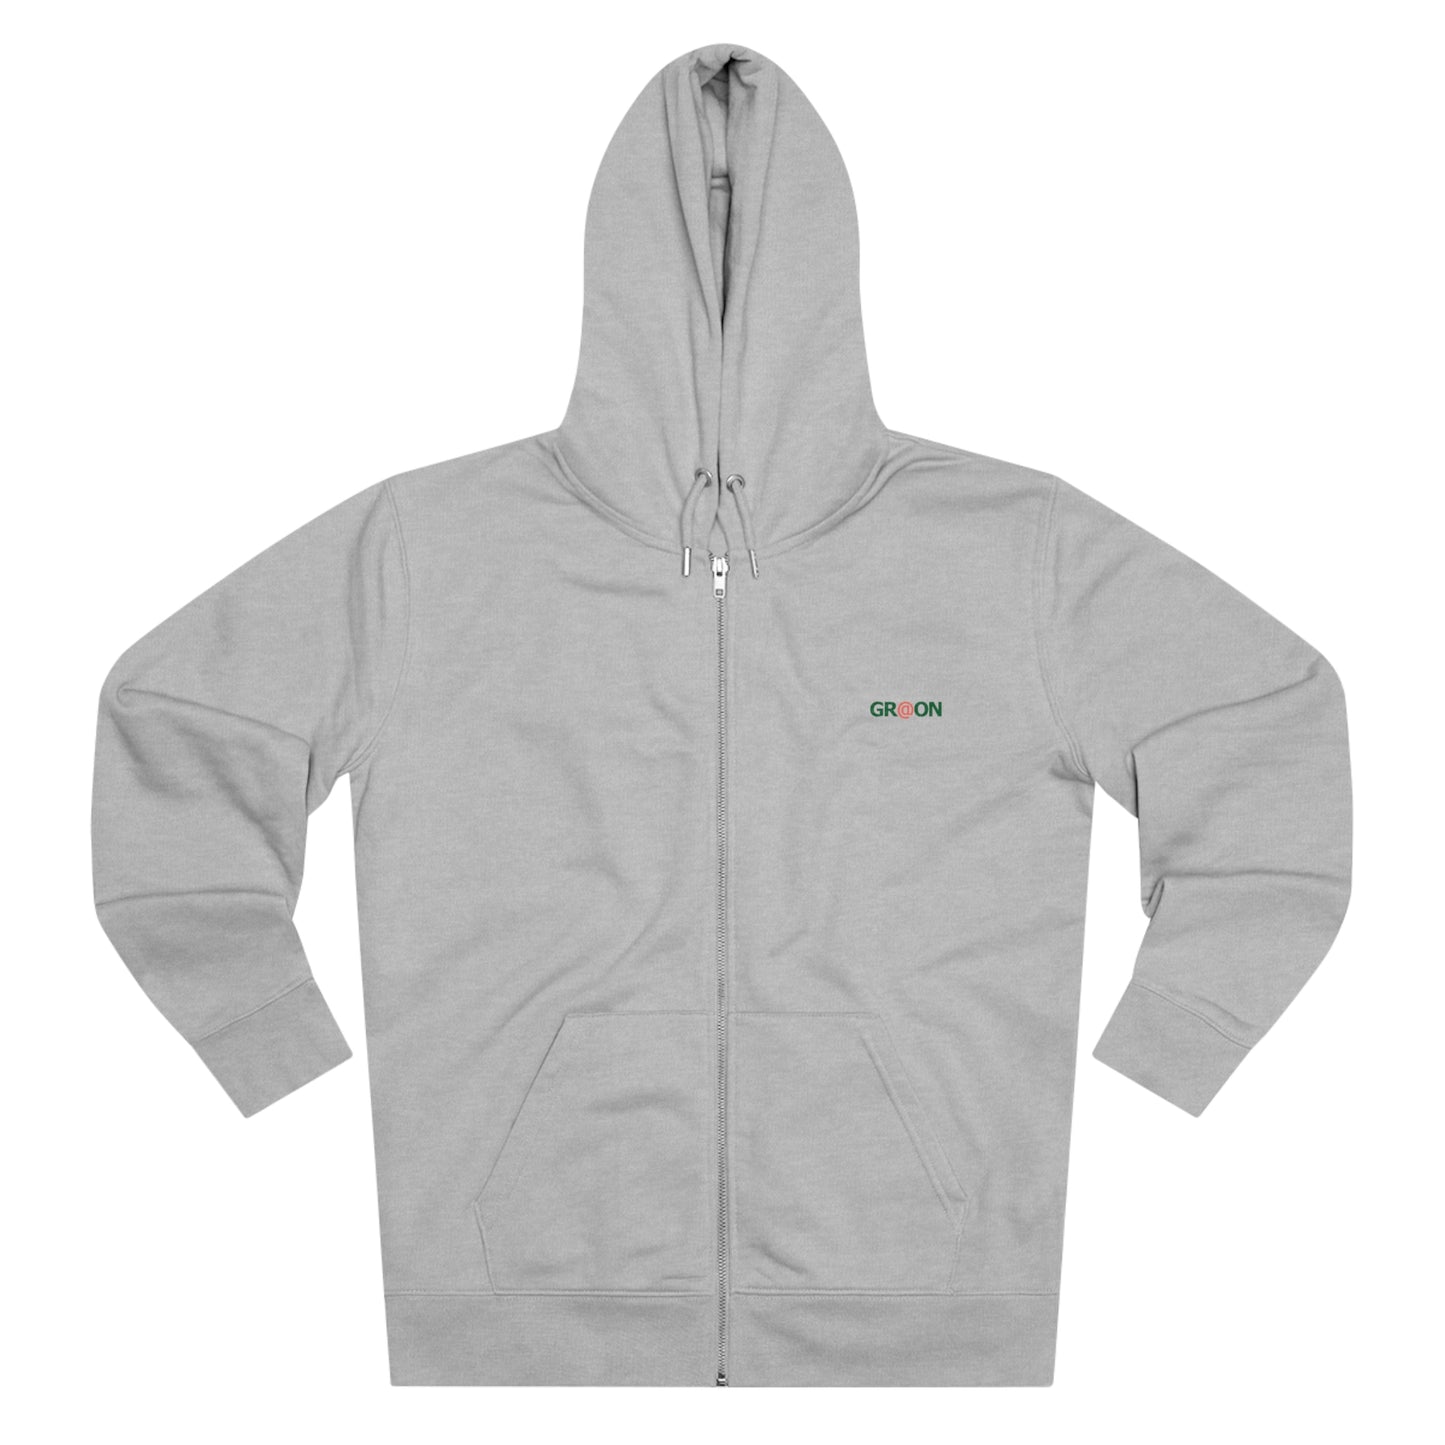 Eco-Friendly Organic - Unisex's Cultivator Zip Hoodie - World Water Day graphic